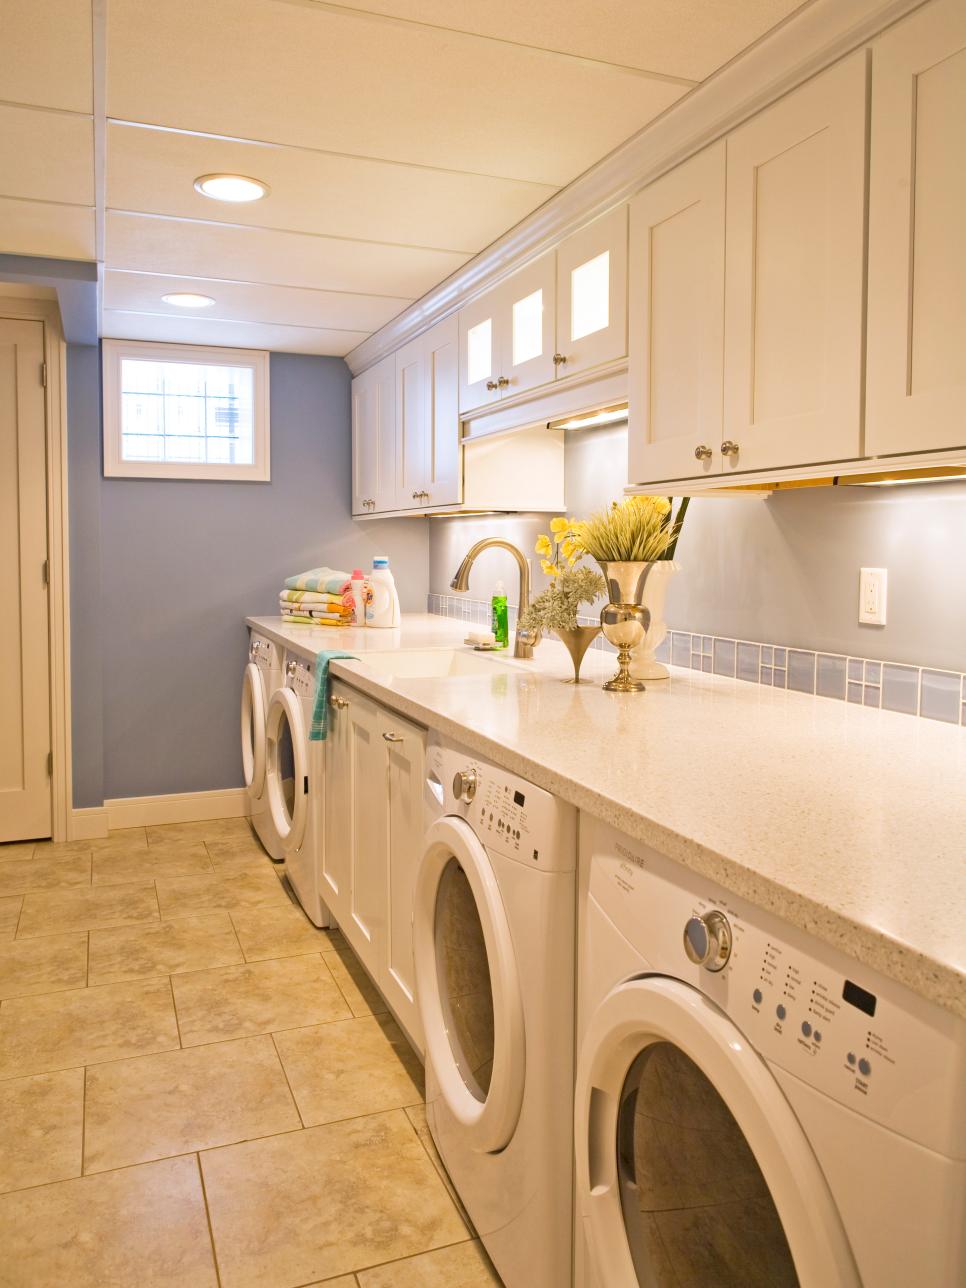 Large Laundry Room With White Cabinetry, Appliances and Counters